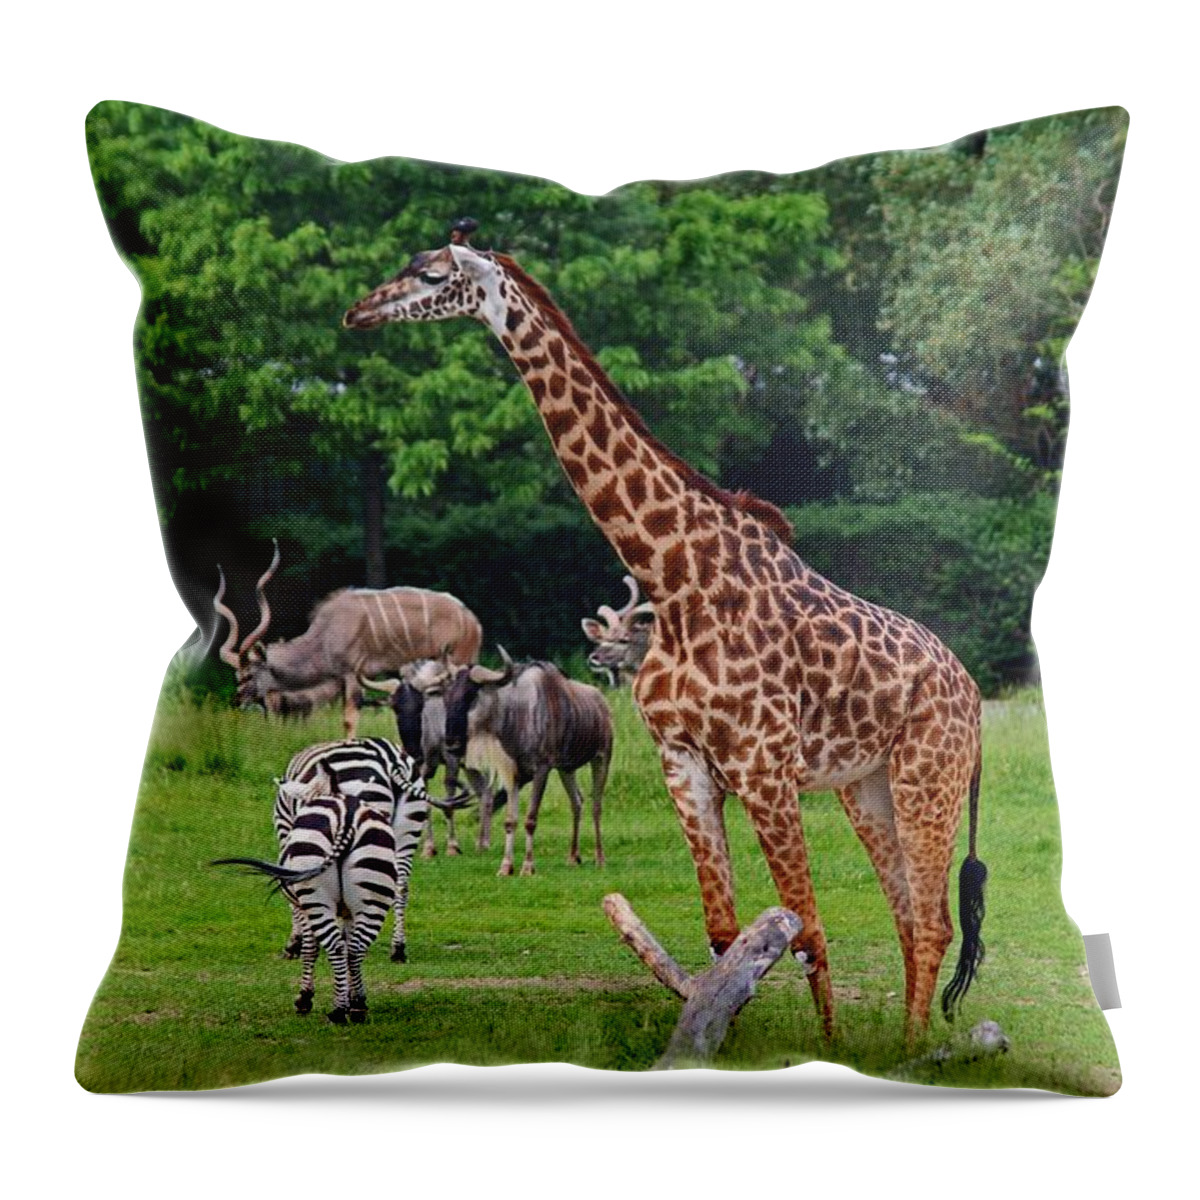 Giraffe Throw Pillow featuring the photograph As Long As We're Together by Michiale Schneider